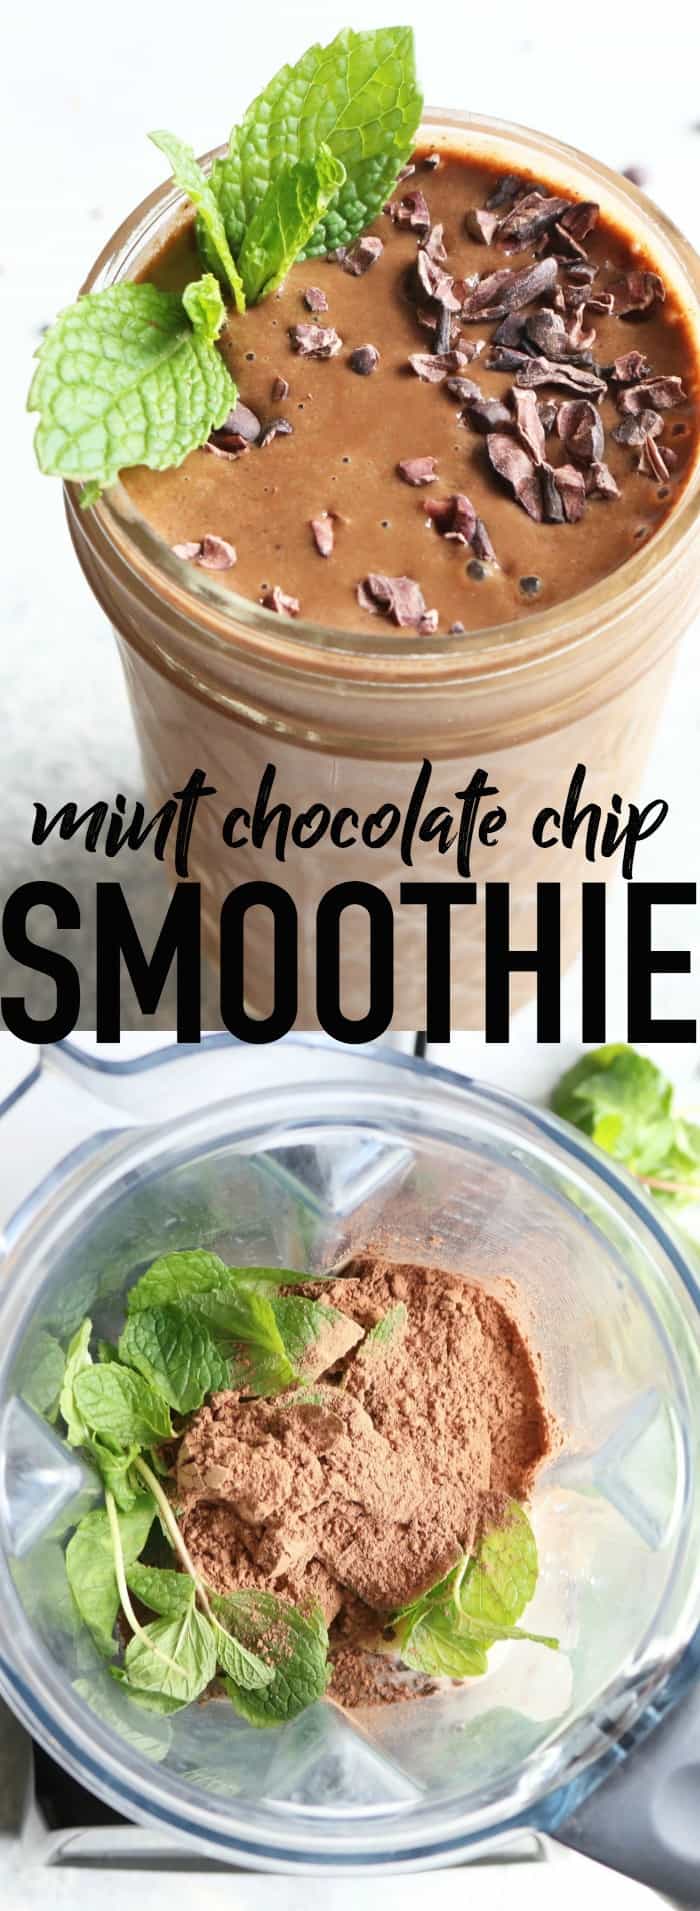 Revamp your smoothie game with this Mint Chocolate Chip Smoothie! It feels super indulgent but is actually packed with healthy, nutritious ingredients! thetoastedpinenut.com #smoothie #breakfast #healthy #snack